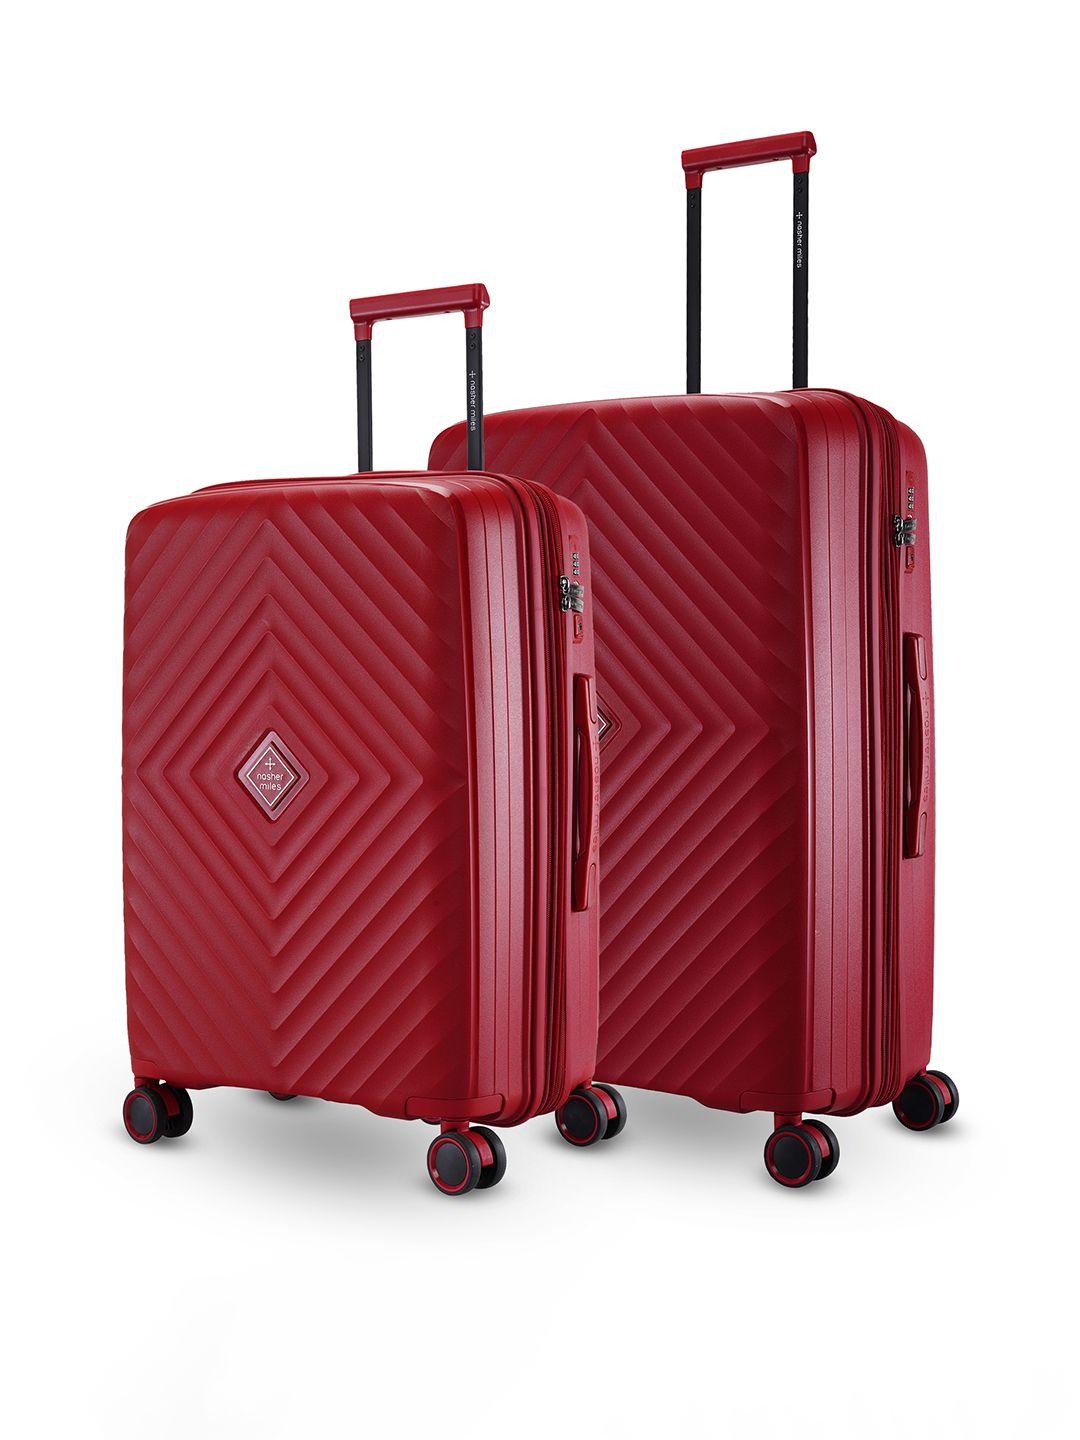 nasher miles set of 2 hard-sided trolley suitcases